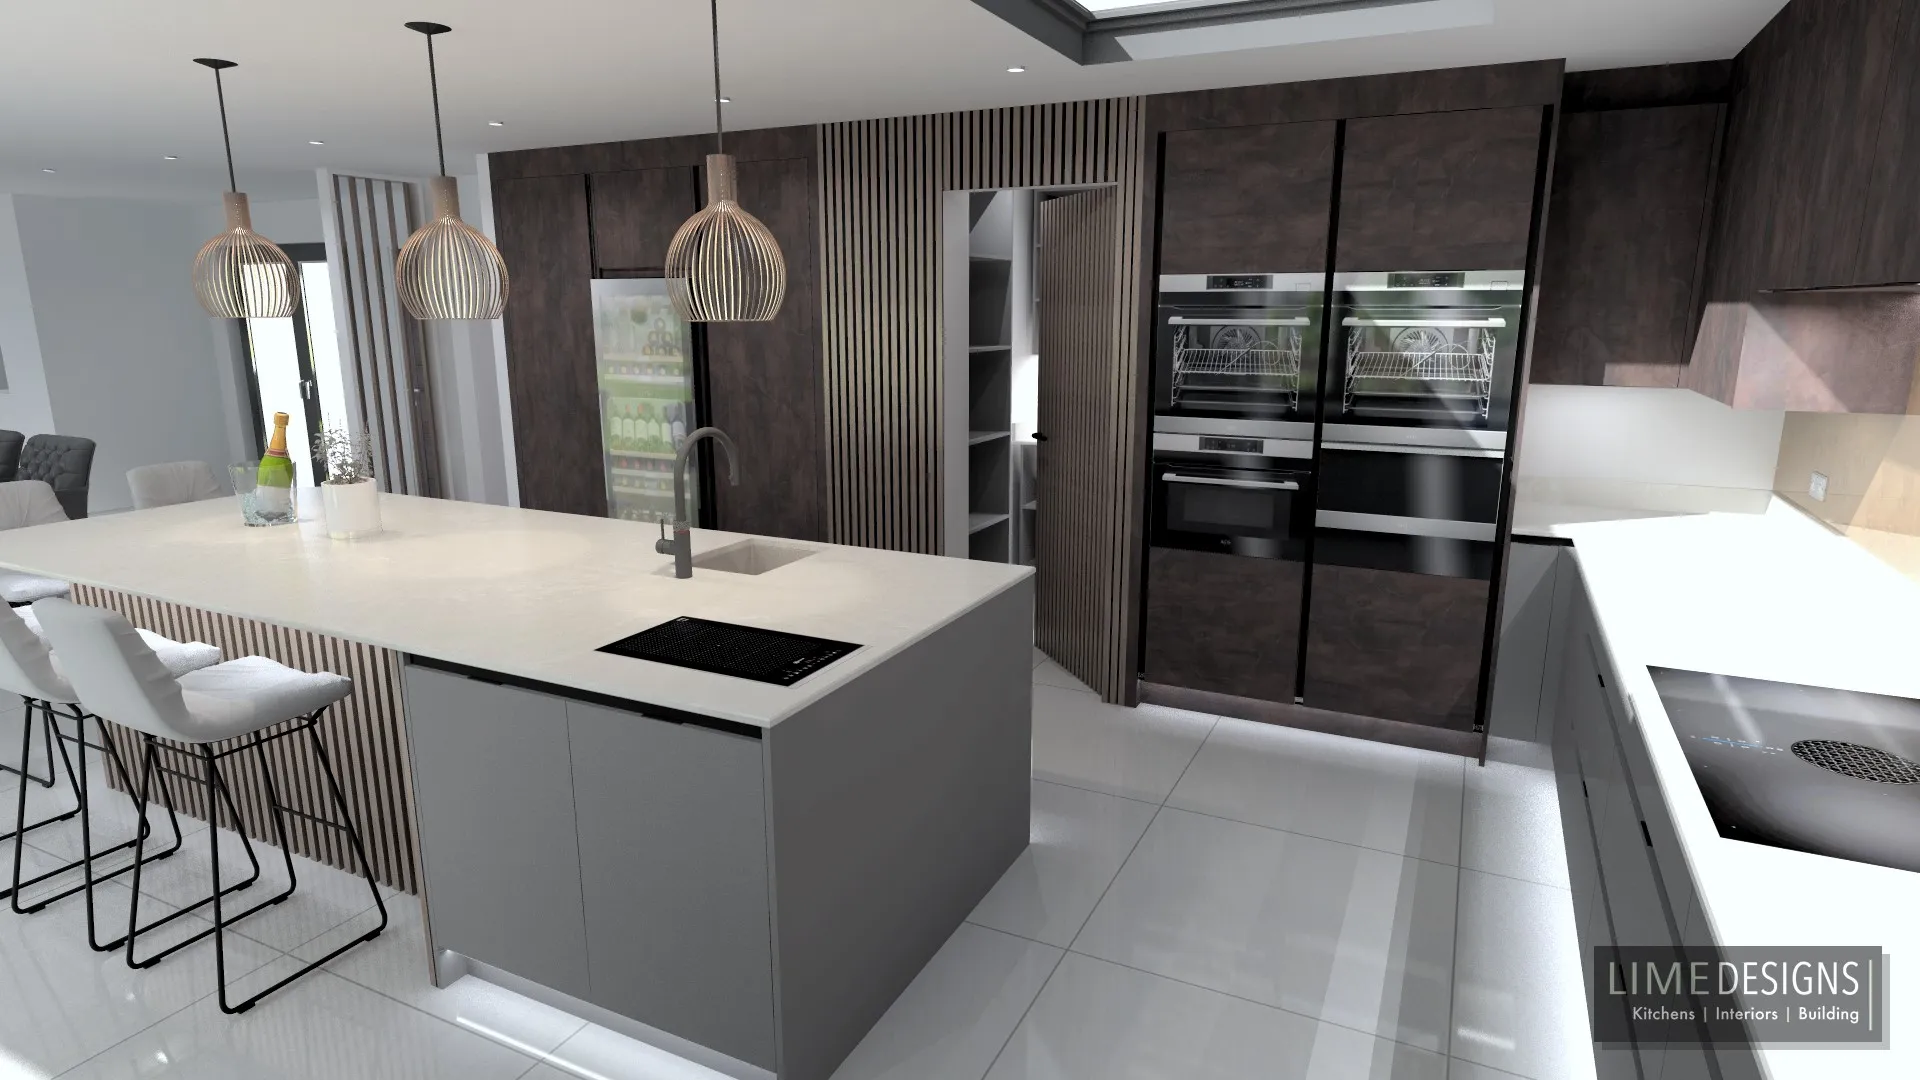 A modern kitchen with a center island and bar stools.